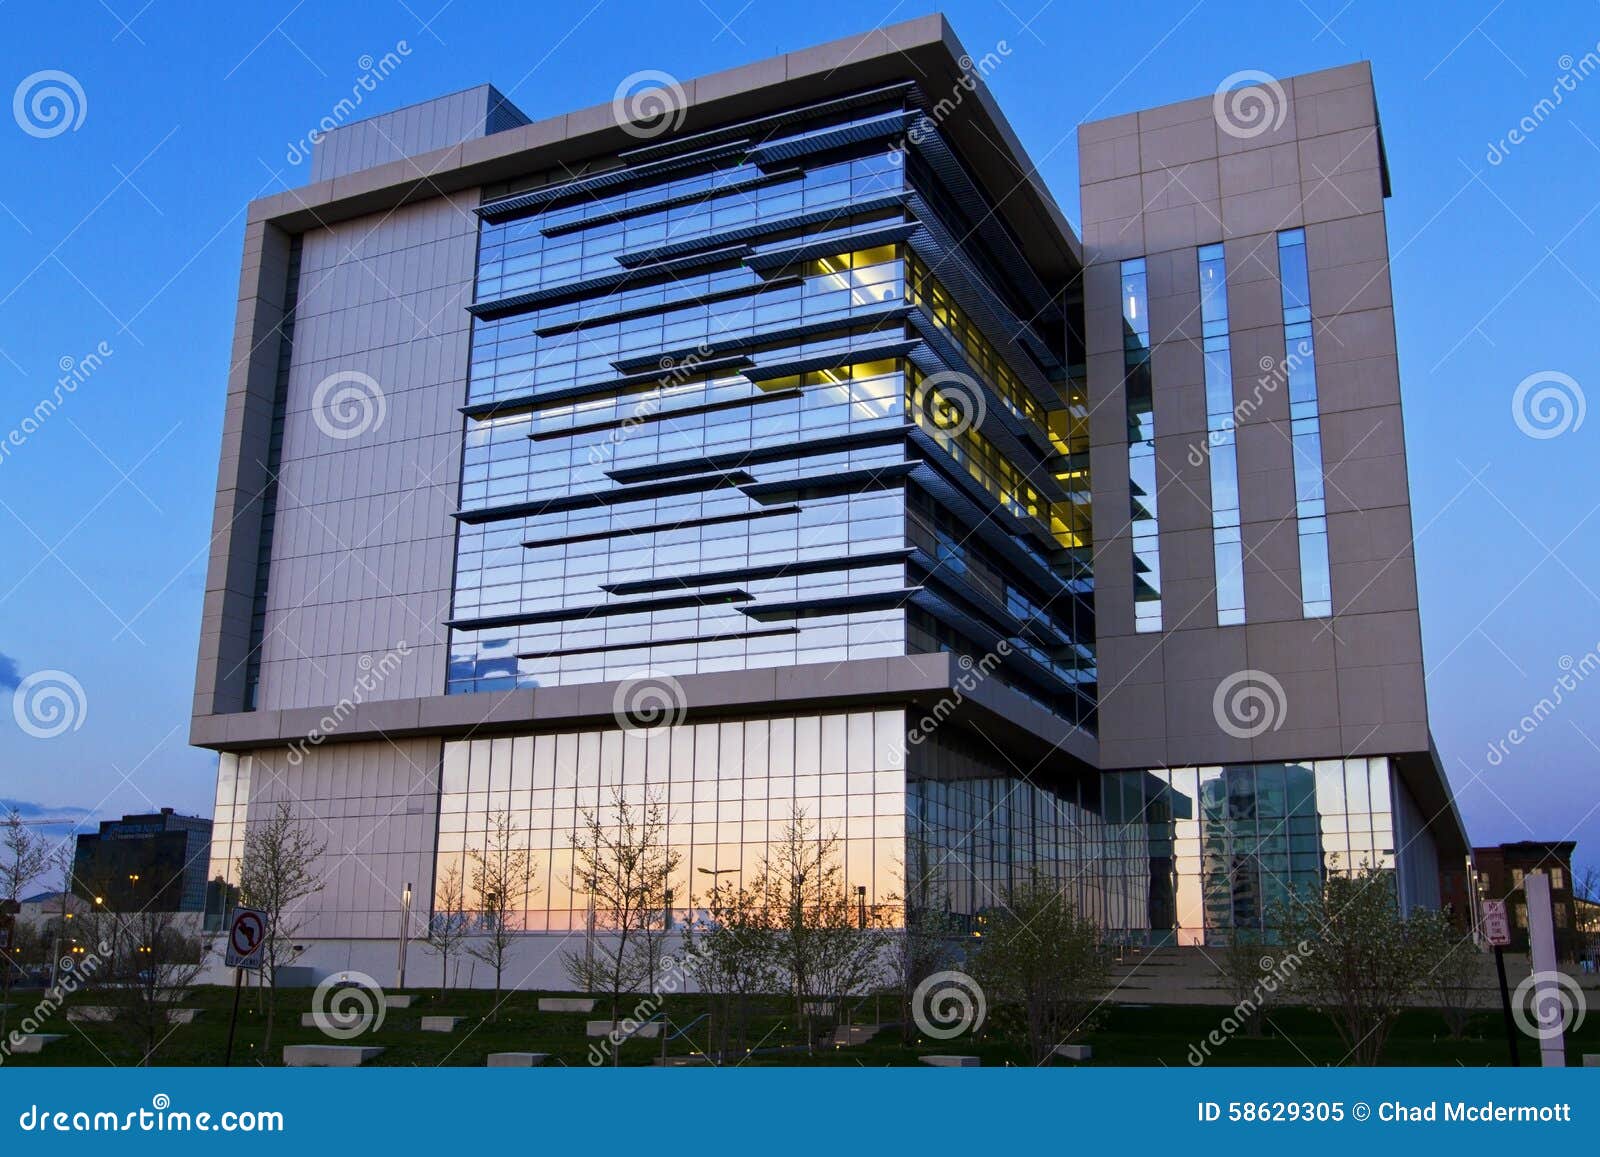 County Court of Columbus Ohio Stock Image Image of justice